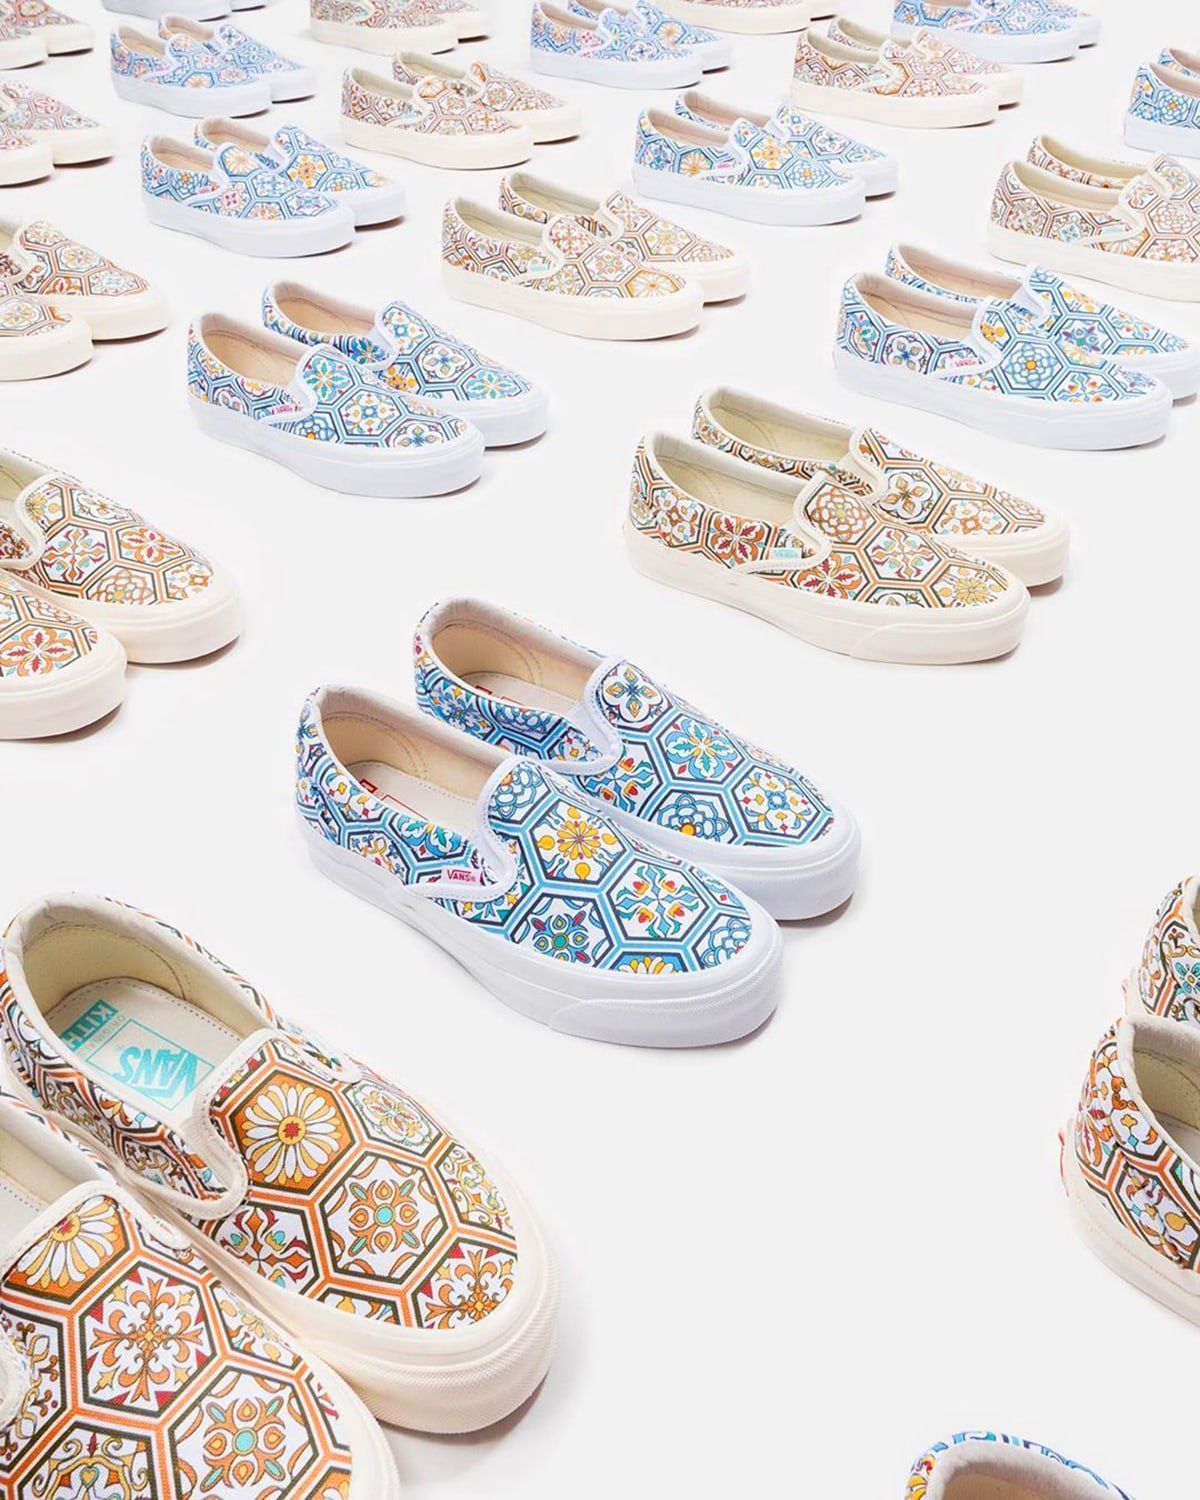 KITH x Vans Slip-On Arrives Infused with Moroccan Tile Inspiration ... تعلم الهندية